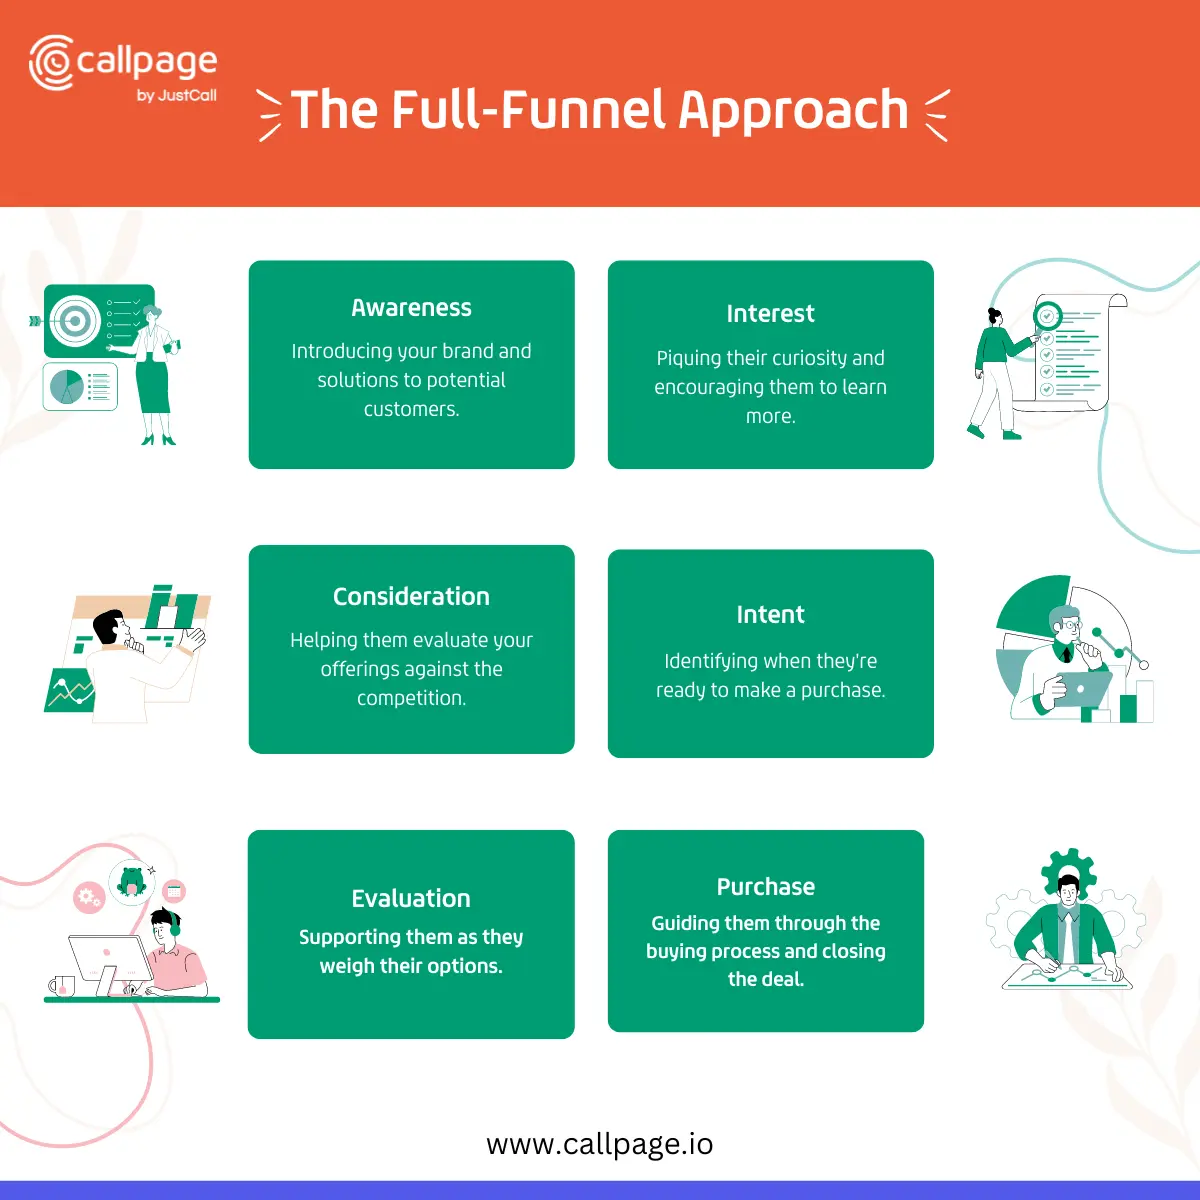 Description of 6 stages of full-funnel marketing: 1. Awareness 2.Interest 3.Consideration 4.Intent 5.Evaluation 6.Purchase